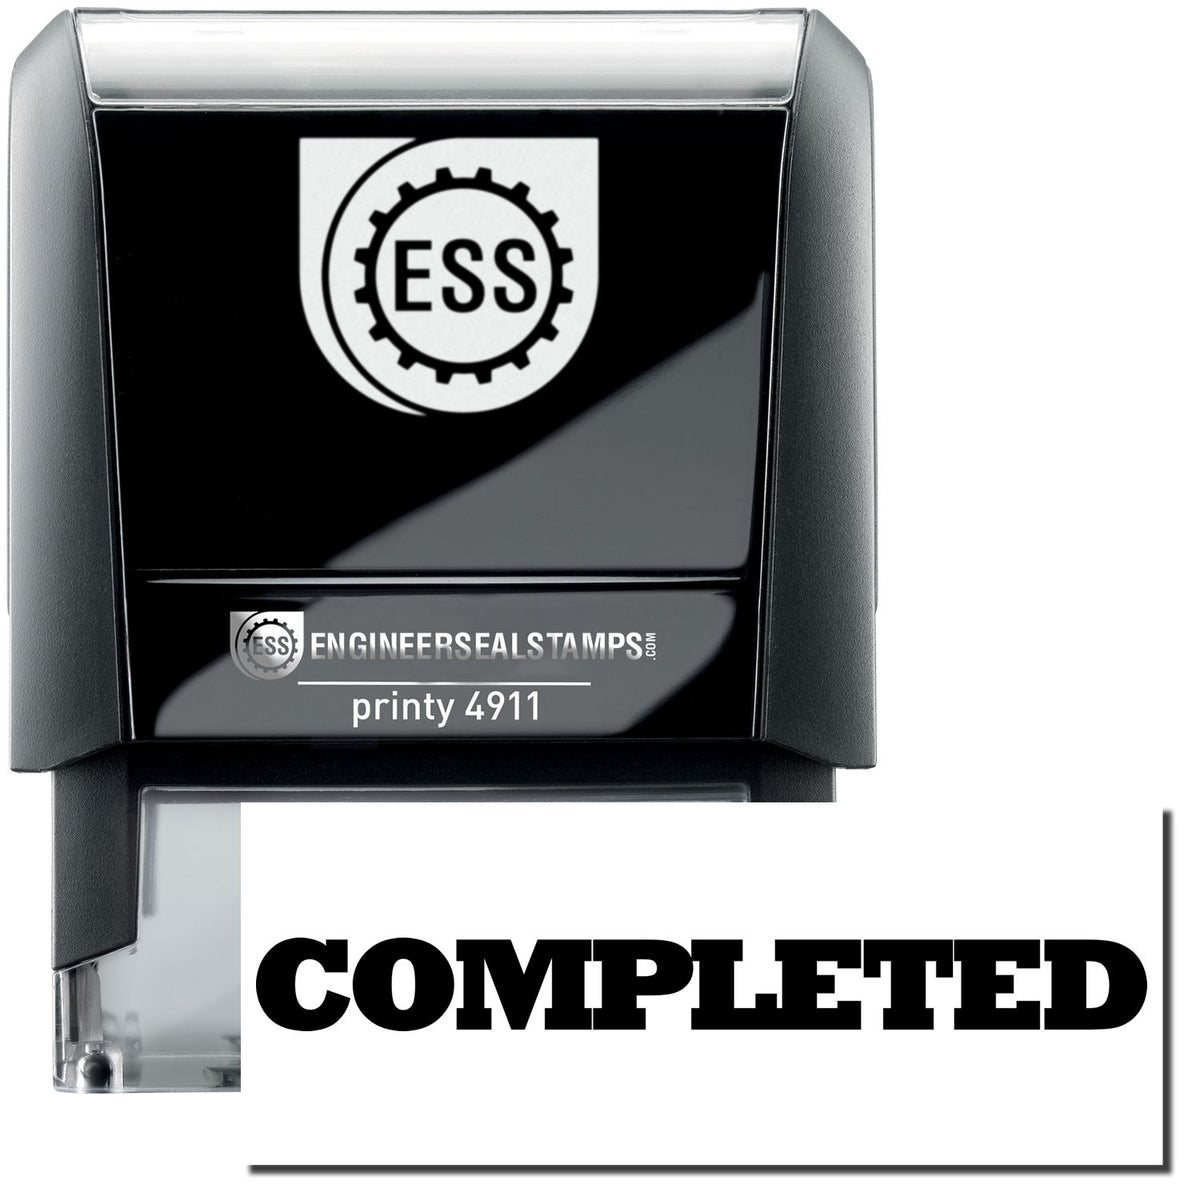 A self-inking stamp with a stamped image showing how the text &quot;COMPLETED&quot; in bold font is displayed after stamping.